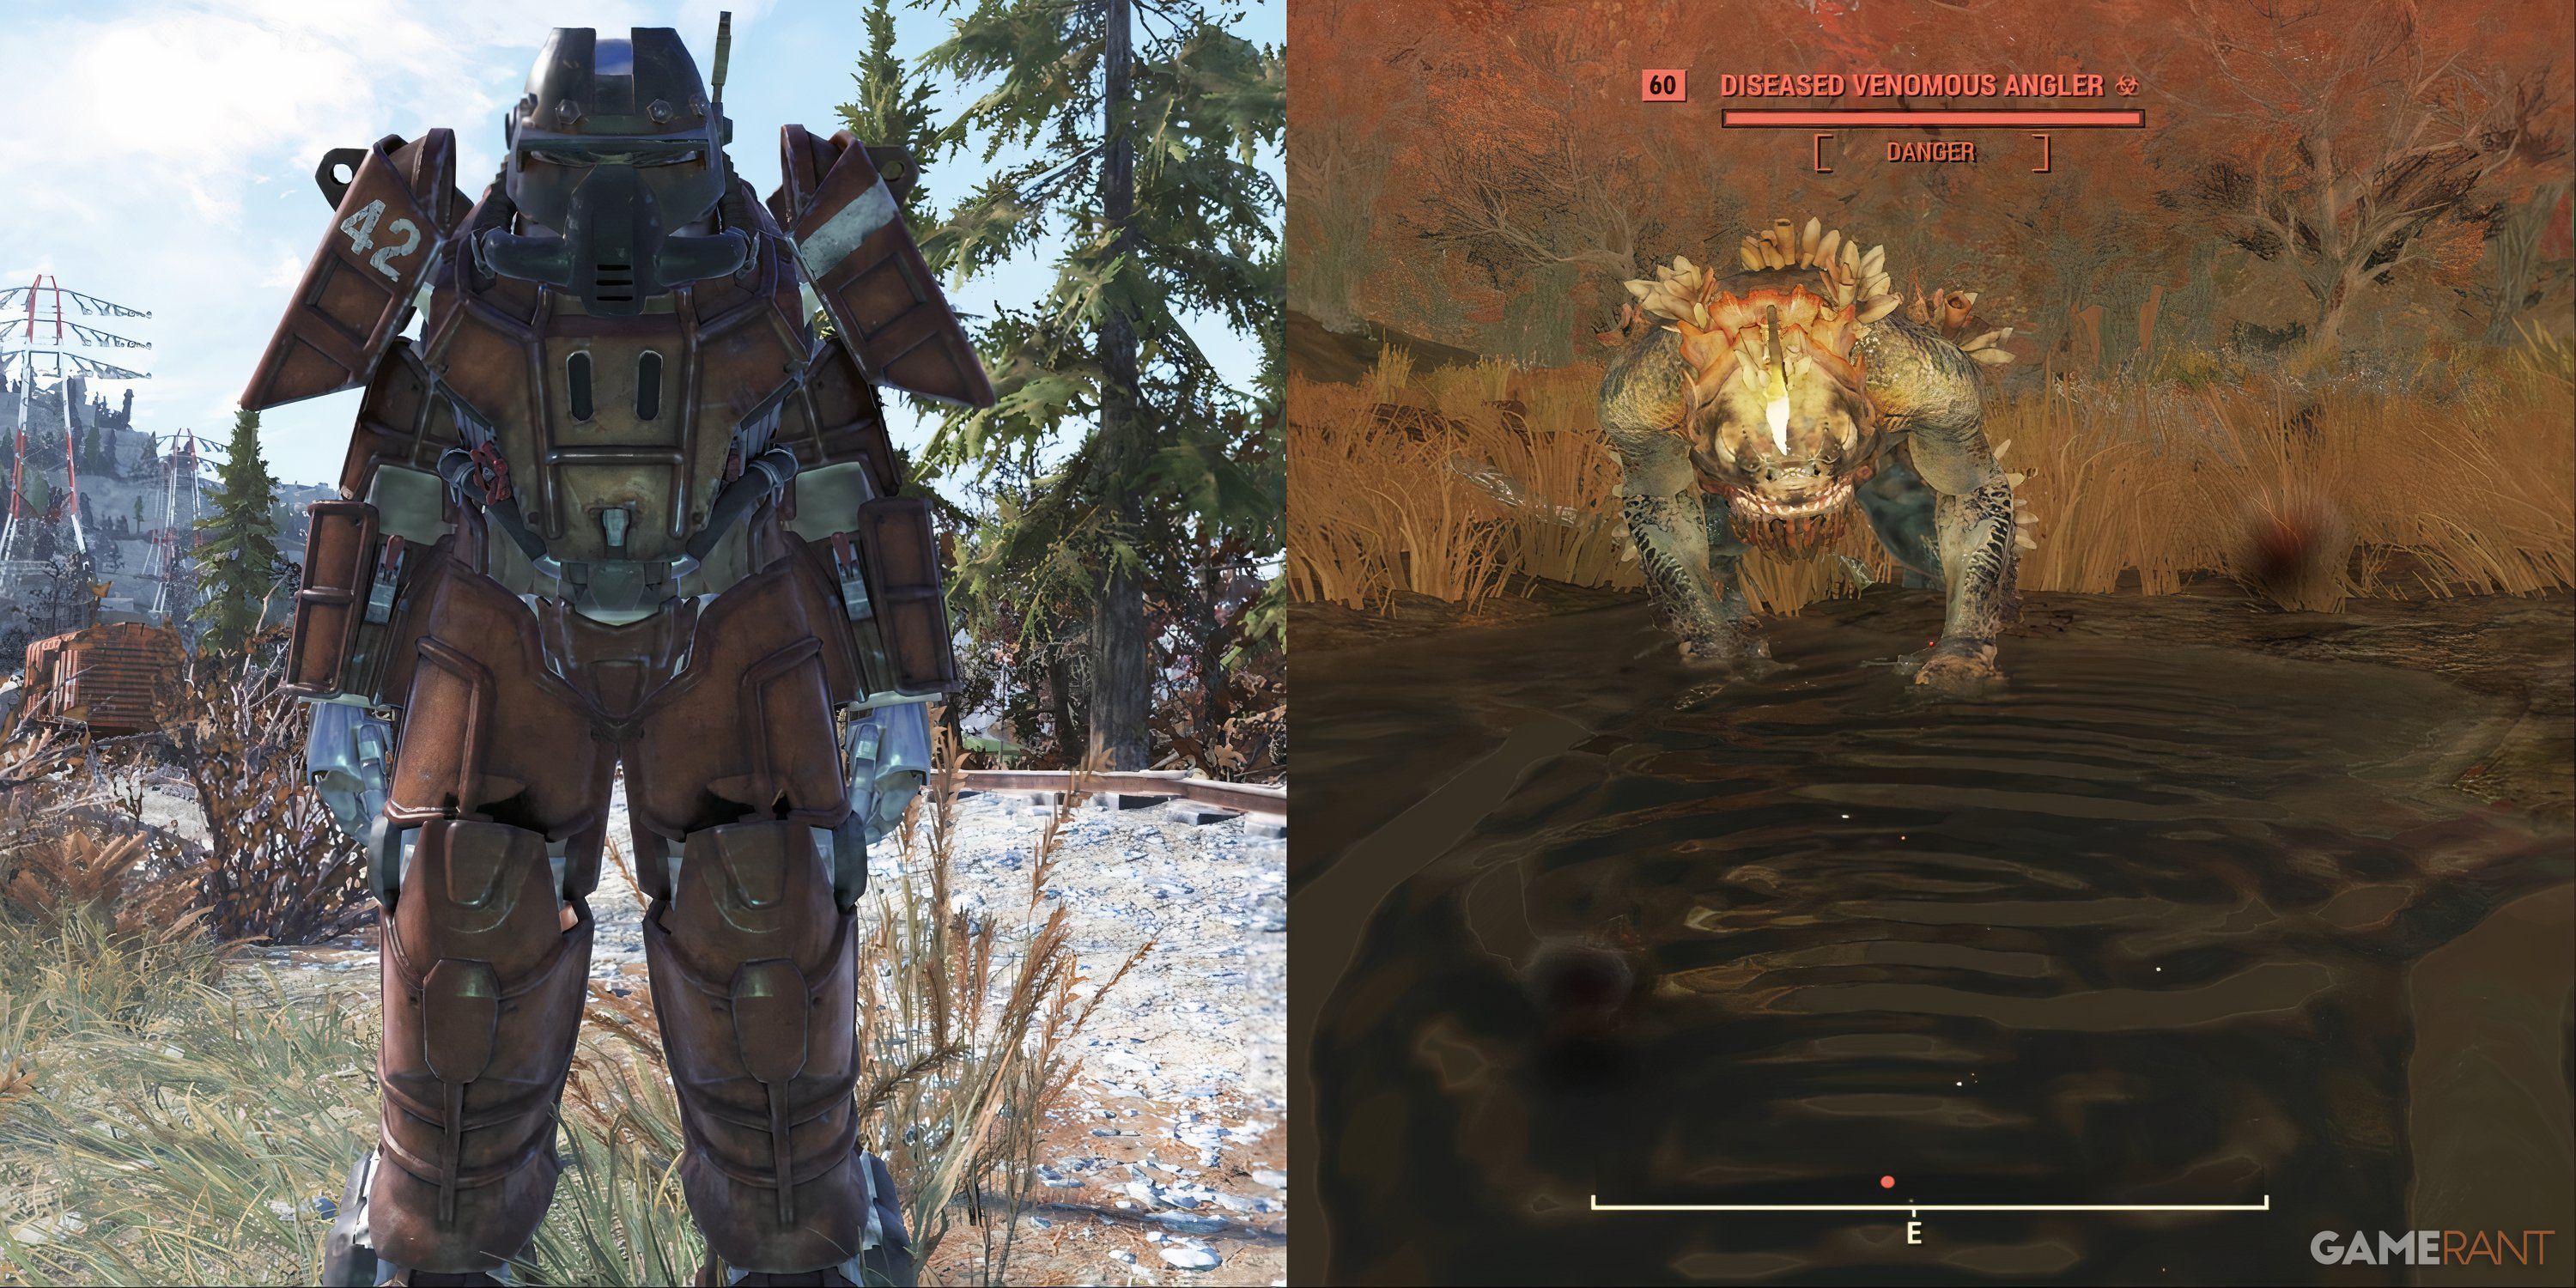 Fallout 76 Union Power Armor And Angler